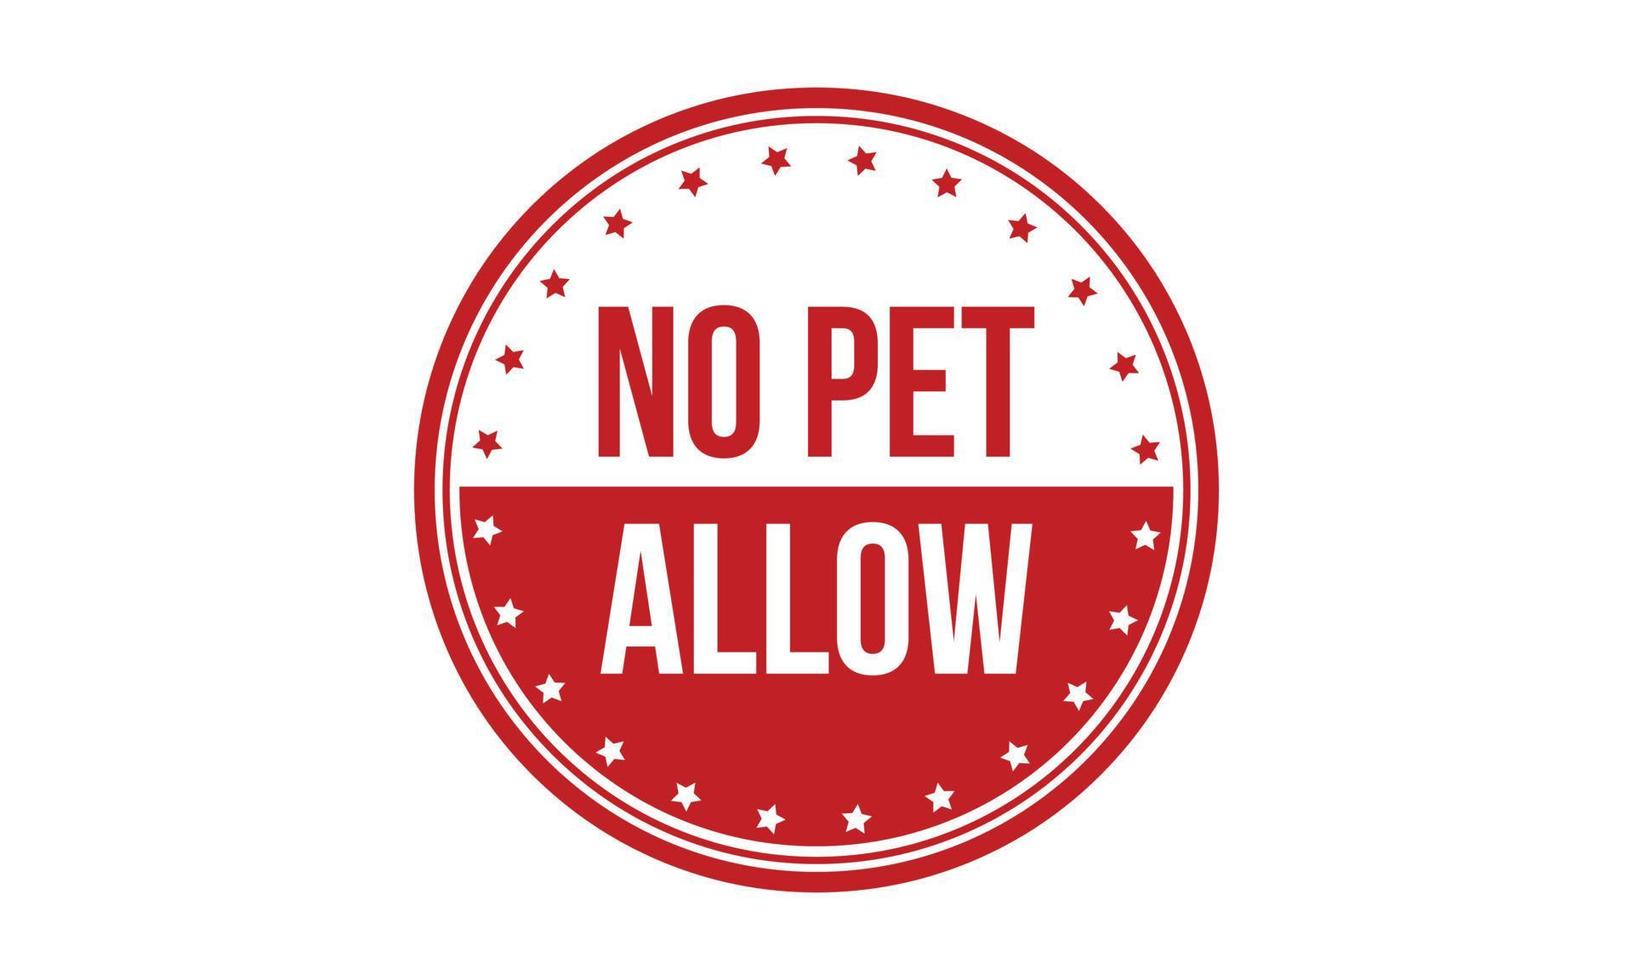 No Pet Allow Rubber Stamp. Red No Pet Allow Rubber Grunge Stamp Seal Vector Illustration